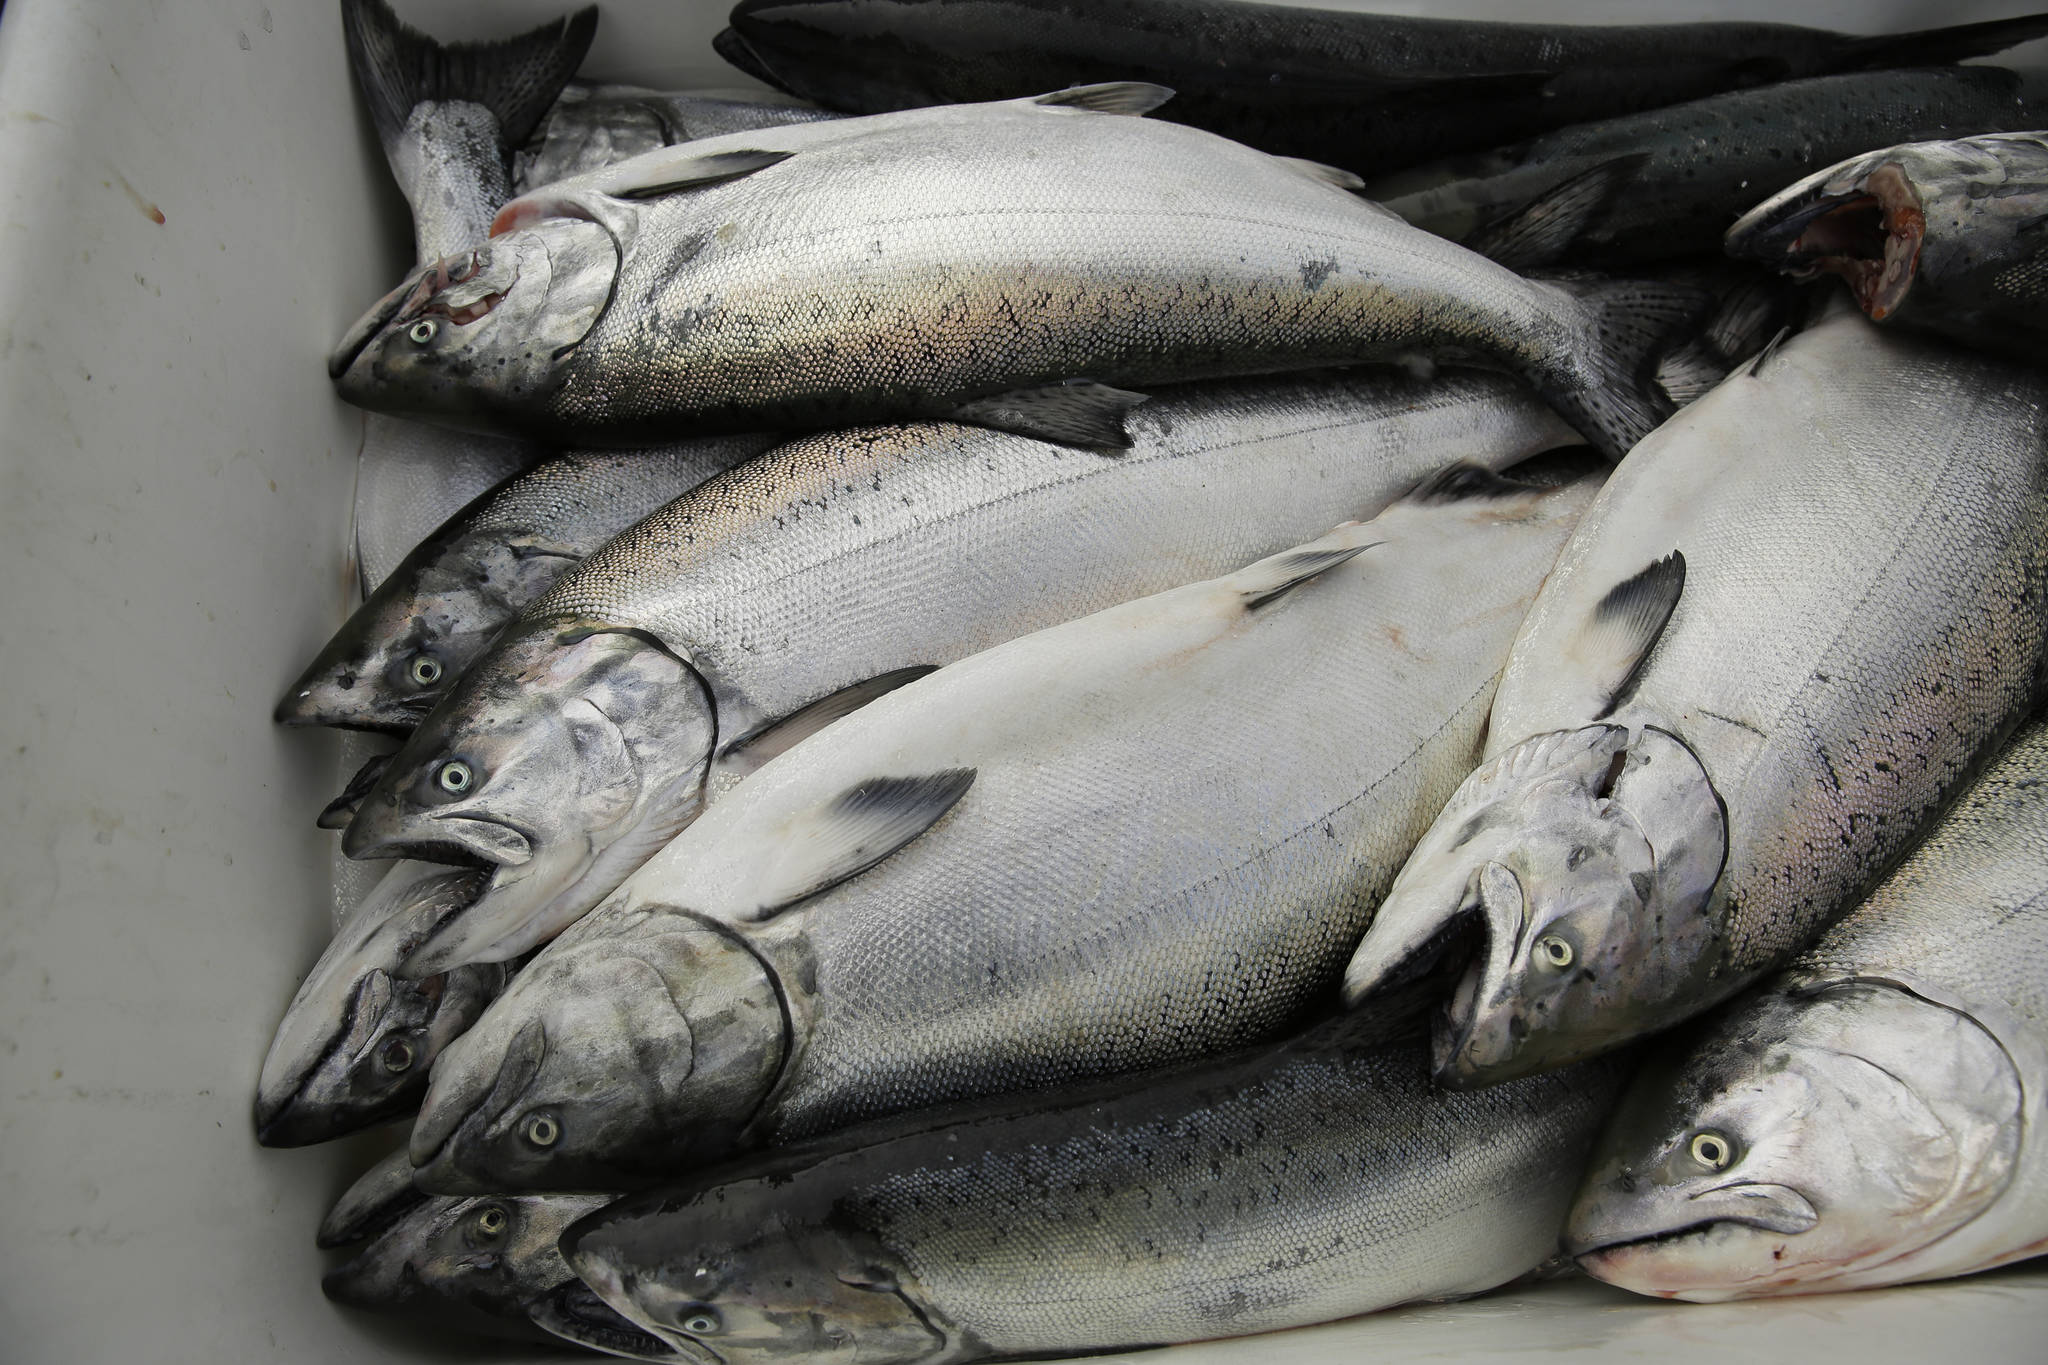 Return of the king: Pacific salmon rebounds in California after drought